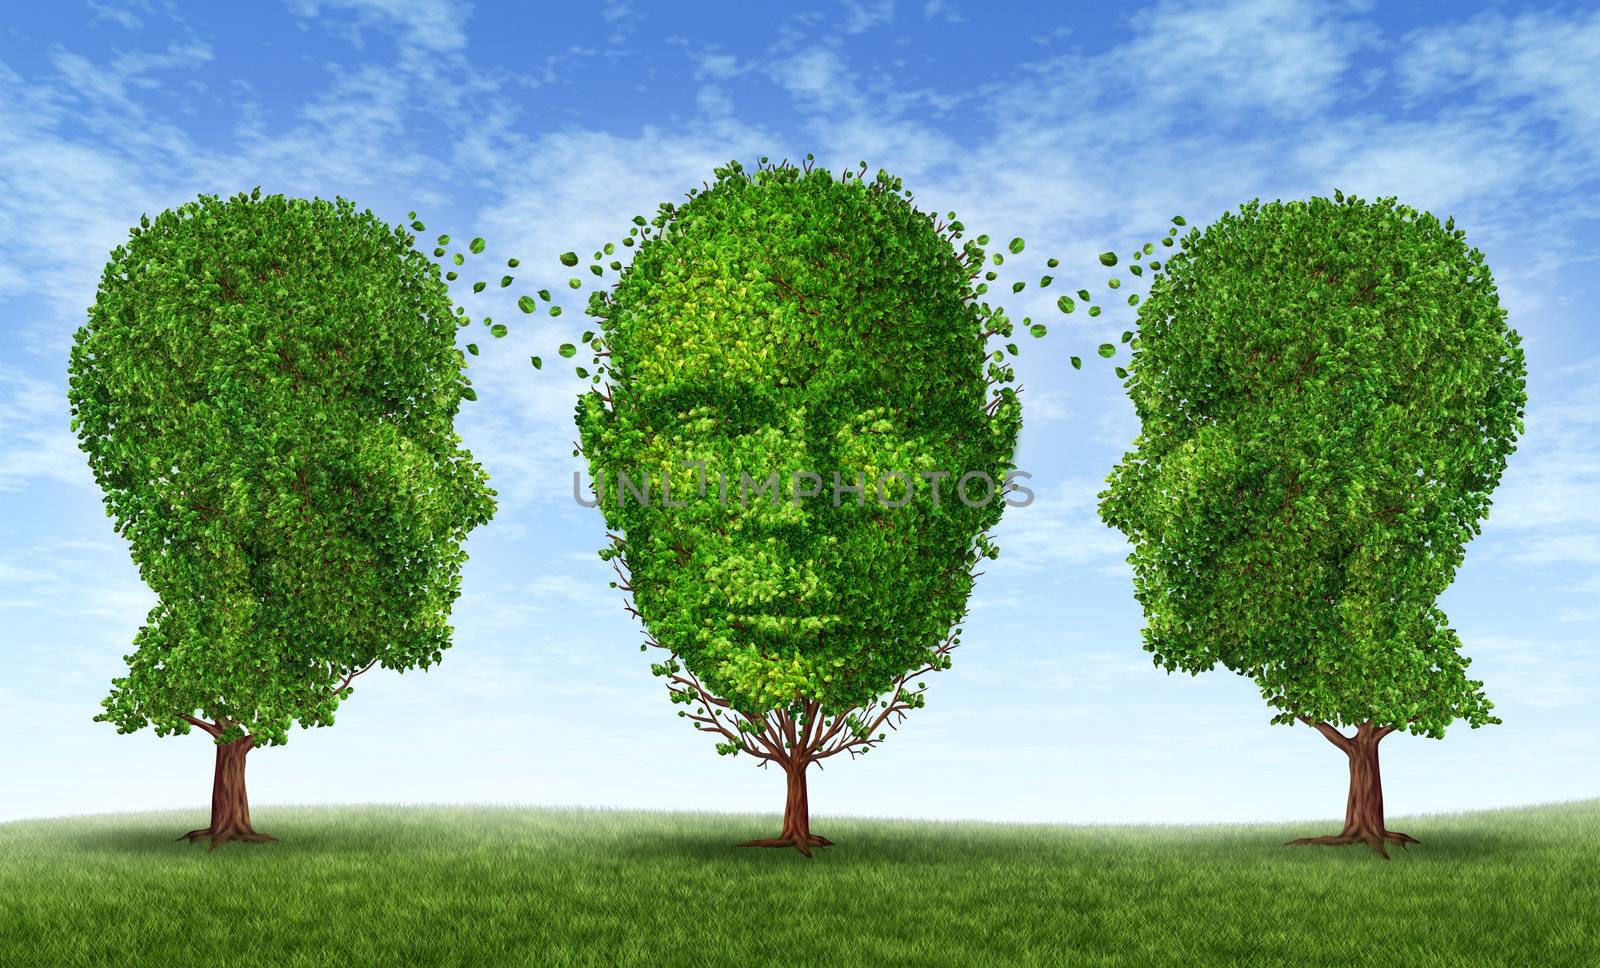 Leaderhip and learning concept as a business Training symbol and growth and education network with three trees in the shape of a human head exchanging content to acquire career skills for life success.